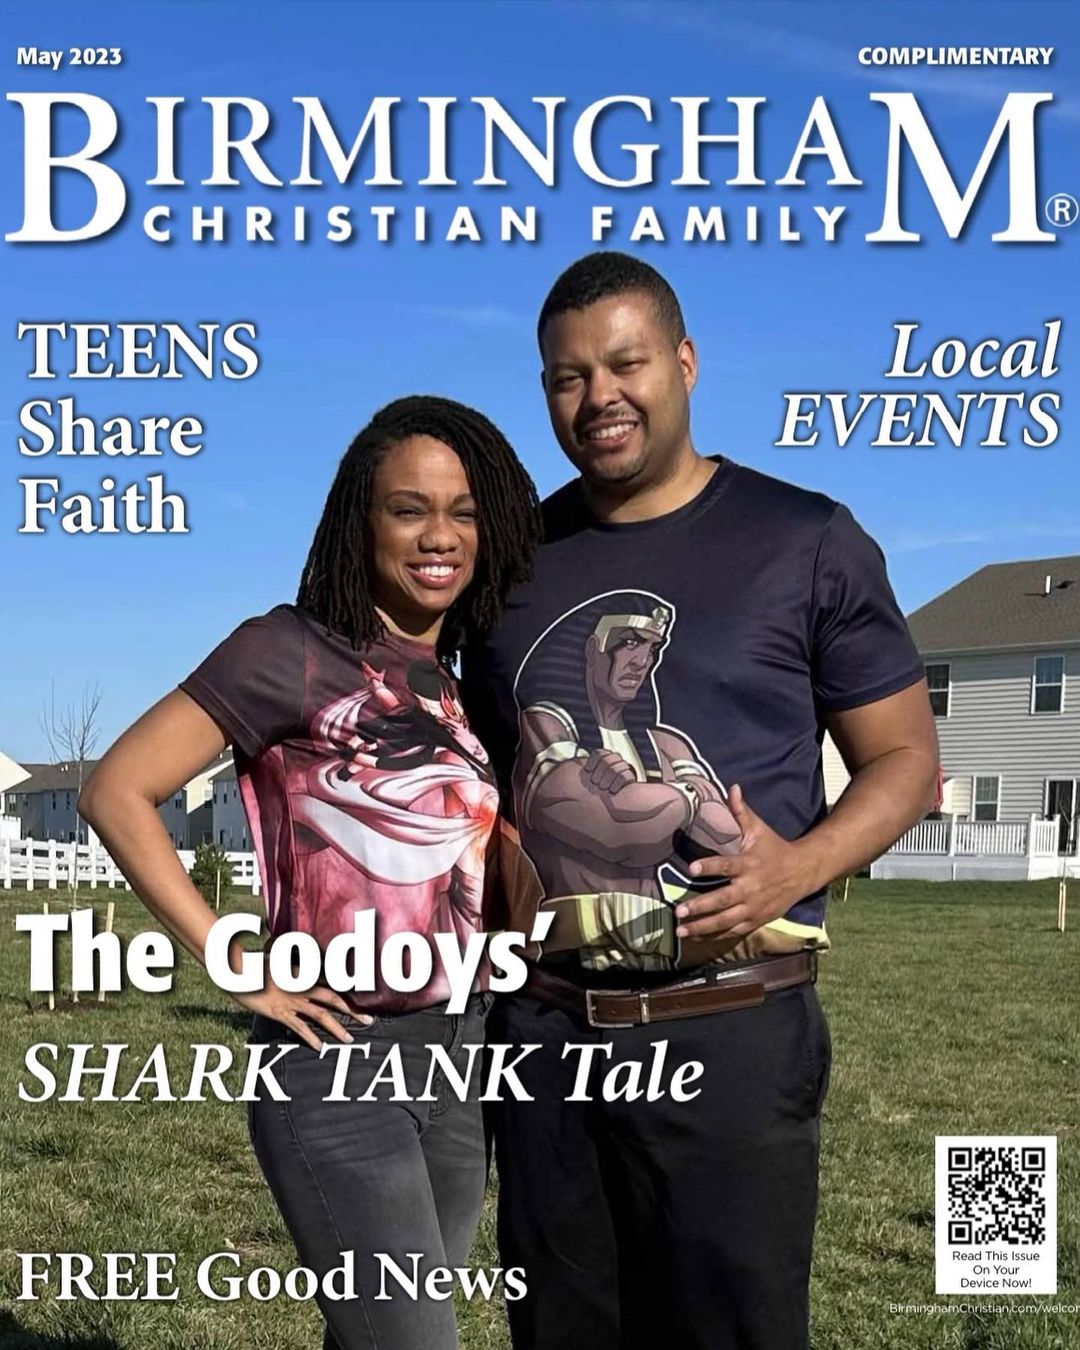 Black Sands Entertainment Makes Front Page of Birmingham Christian Family